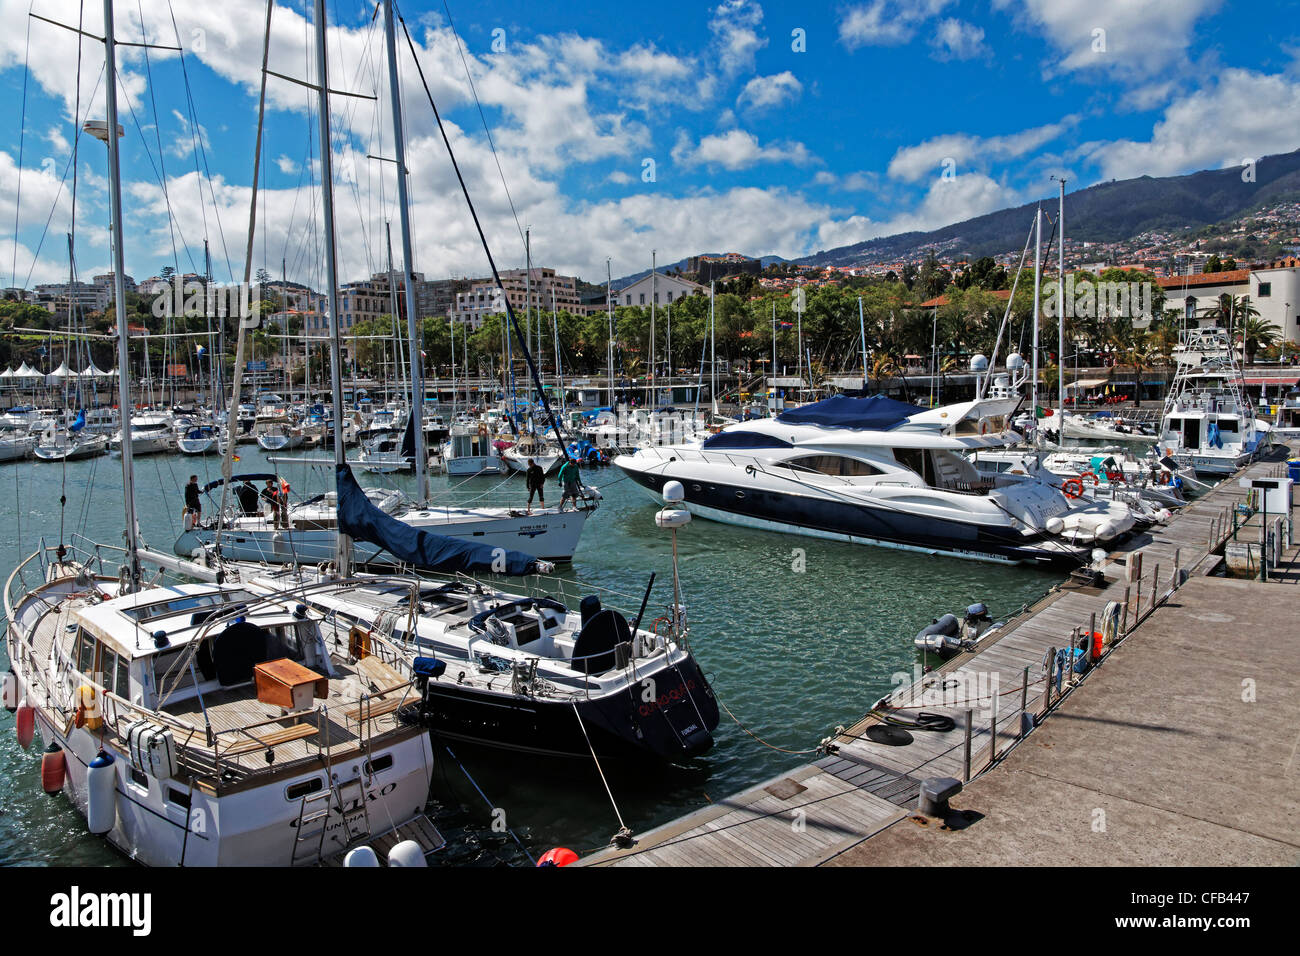 Europe, Portugal, Republica Portuguesa, Madeira, Funchal, Cais, yacht harbour, Funchal, place of interest, tourism, panorama, ve Stock Photo